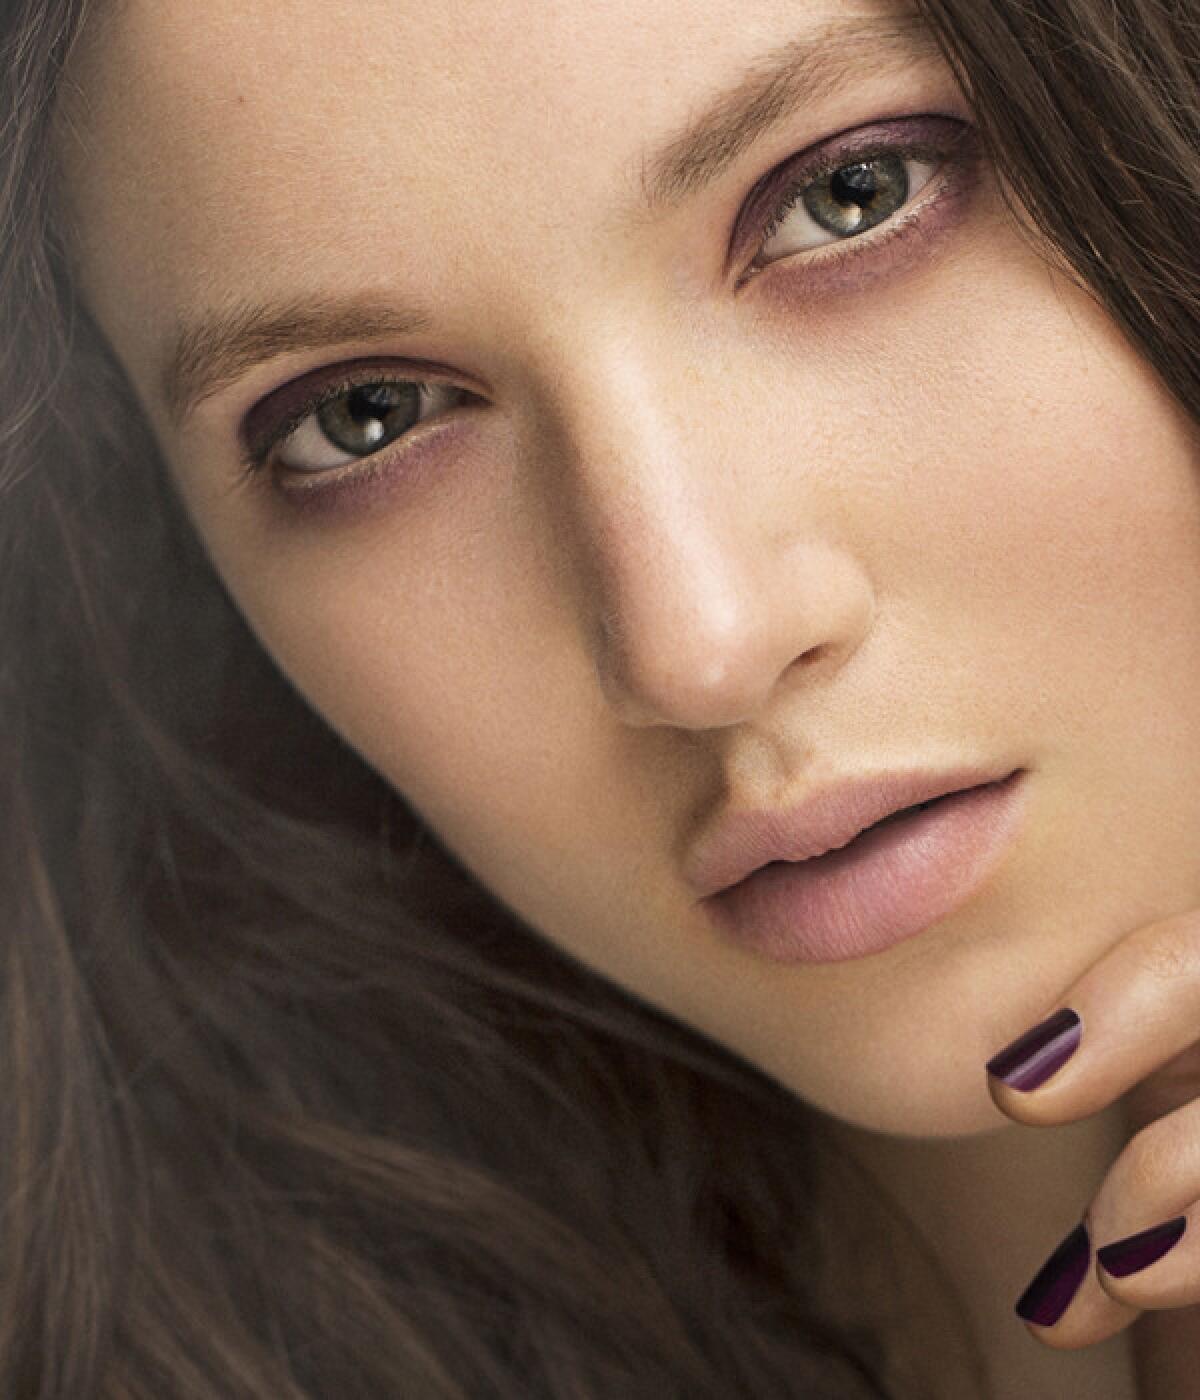 Burberry Make-Up fall 2014 advertising campaign image, featuring British model Matilda Lowther.